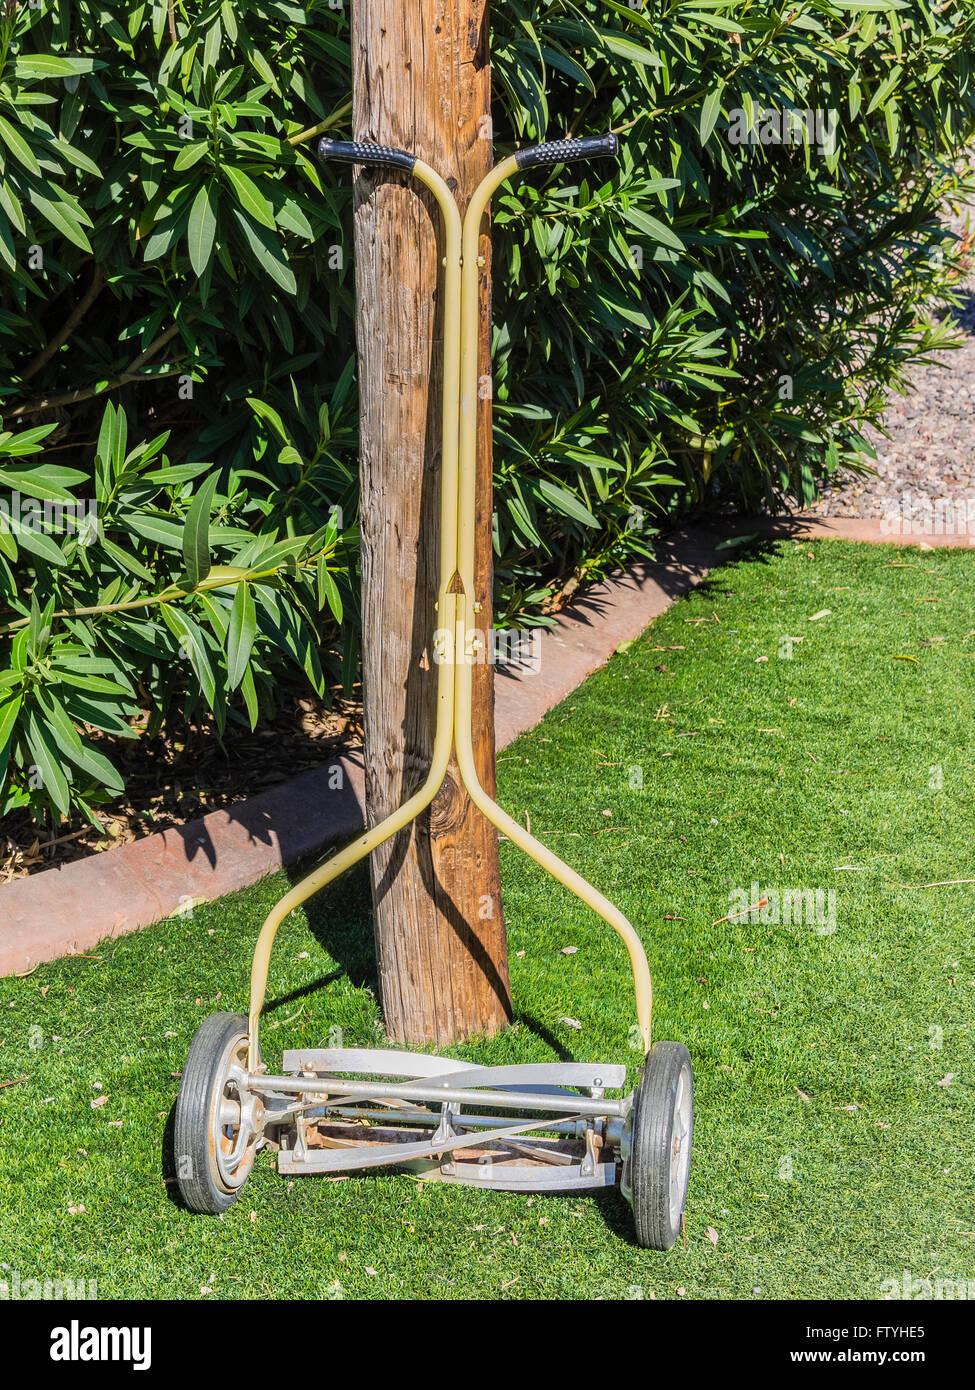 https://c8.alamy.com/comp/FTYHE5/antique-reel-type-lawn-mower-leaning-against-a-telephone-pole-FTYHE5.jpg